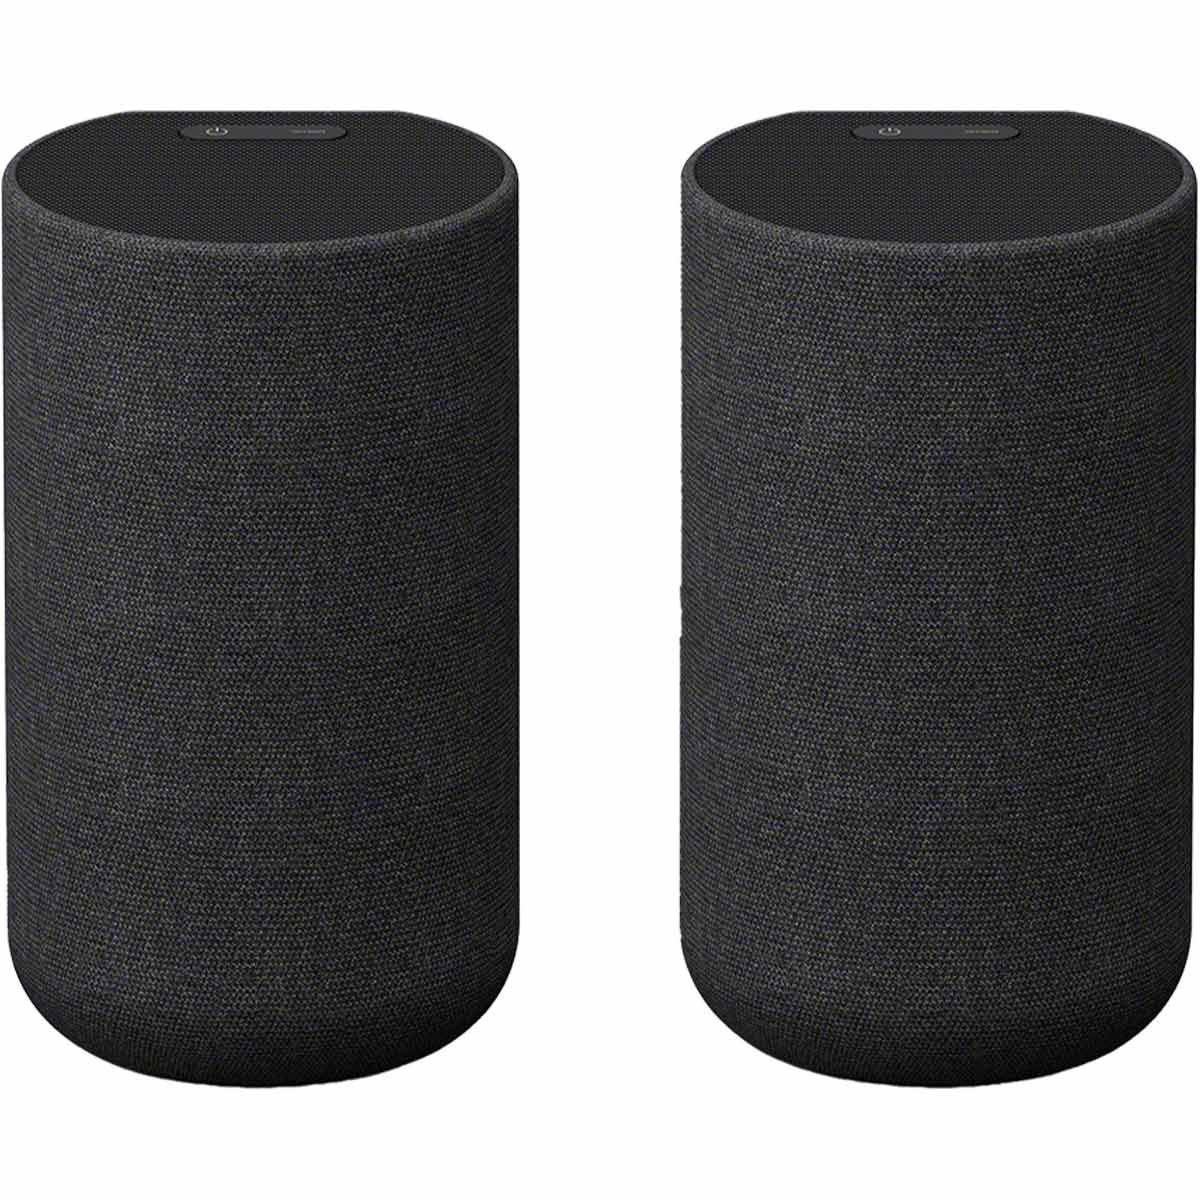 Sony SARS5 Wireless rear speakers with built-in battery for HT-A7000/HT-A5000 - front view of pair